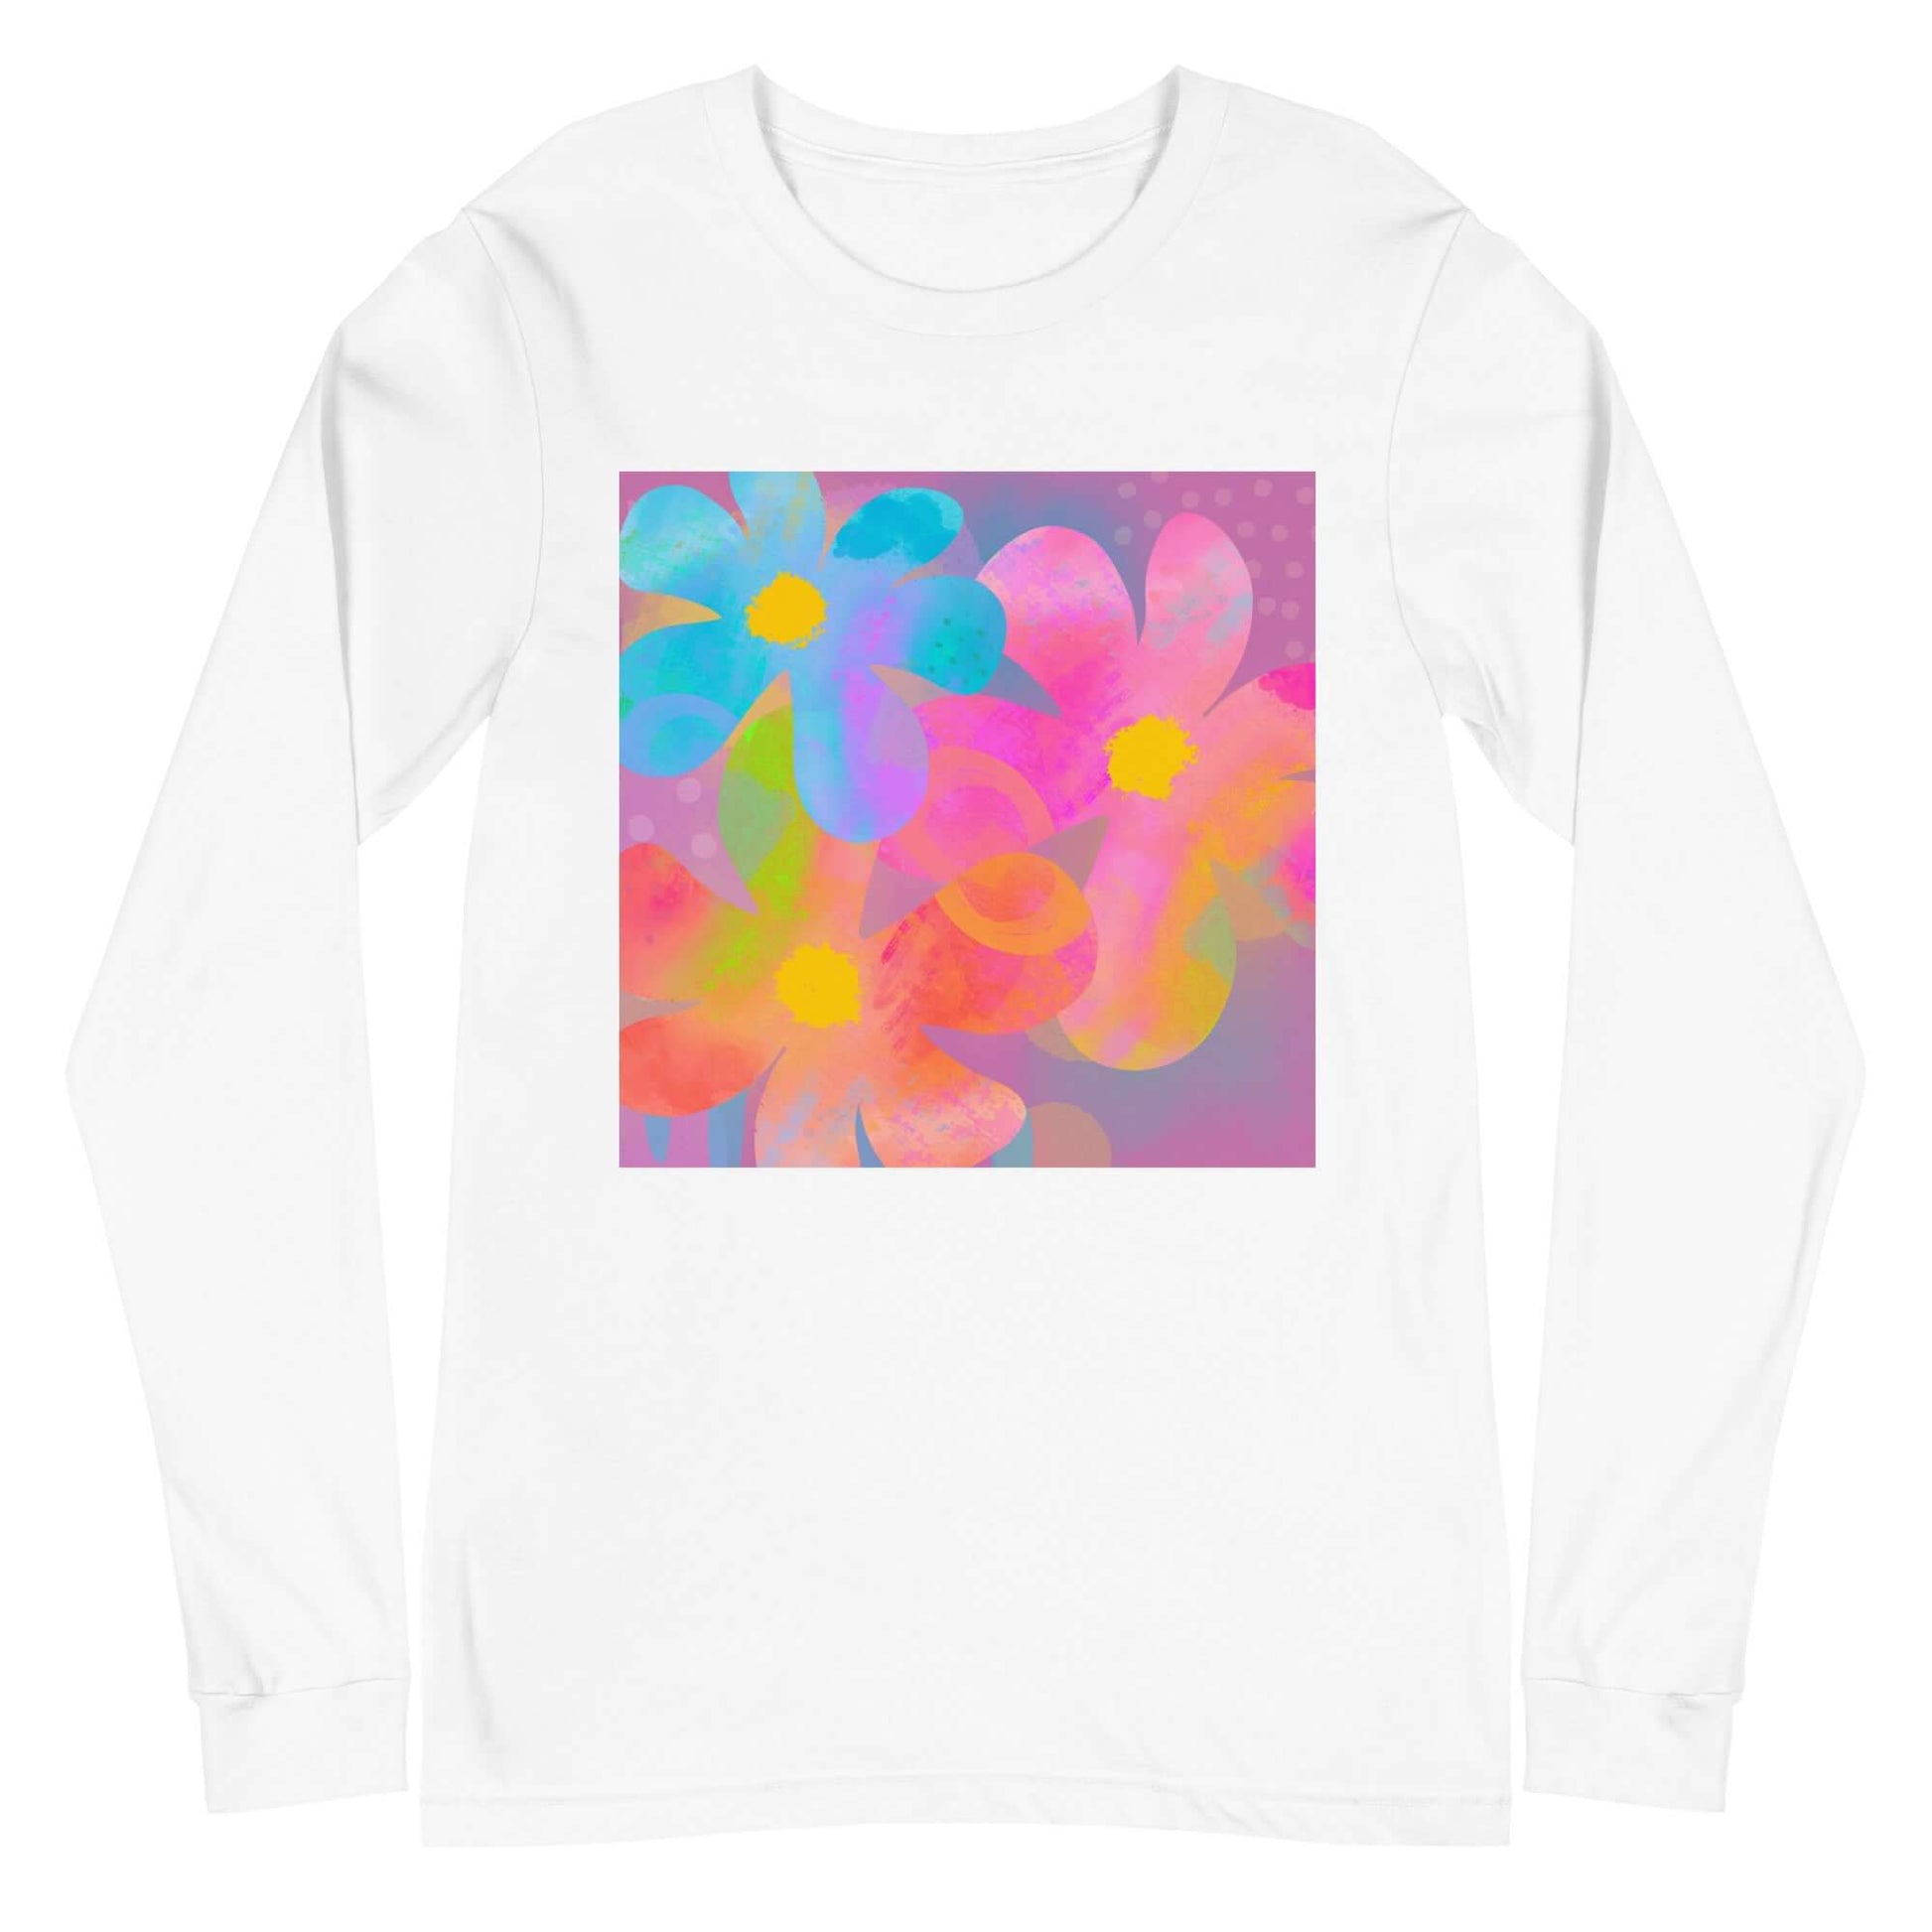 Big Colorful 1960s Psychedelic “Hippie Flowers” Unisex Long Sleeve Tee in White